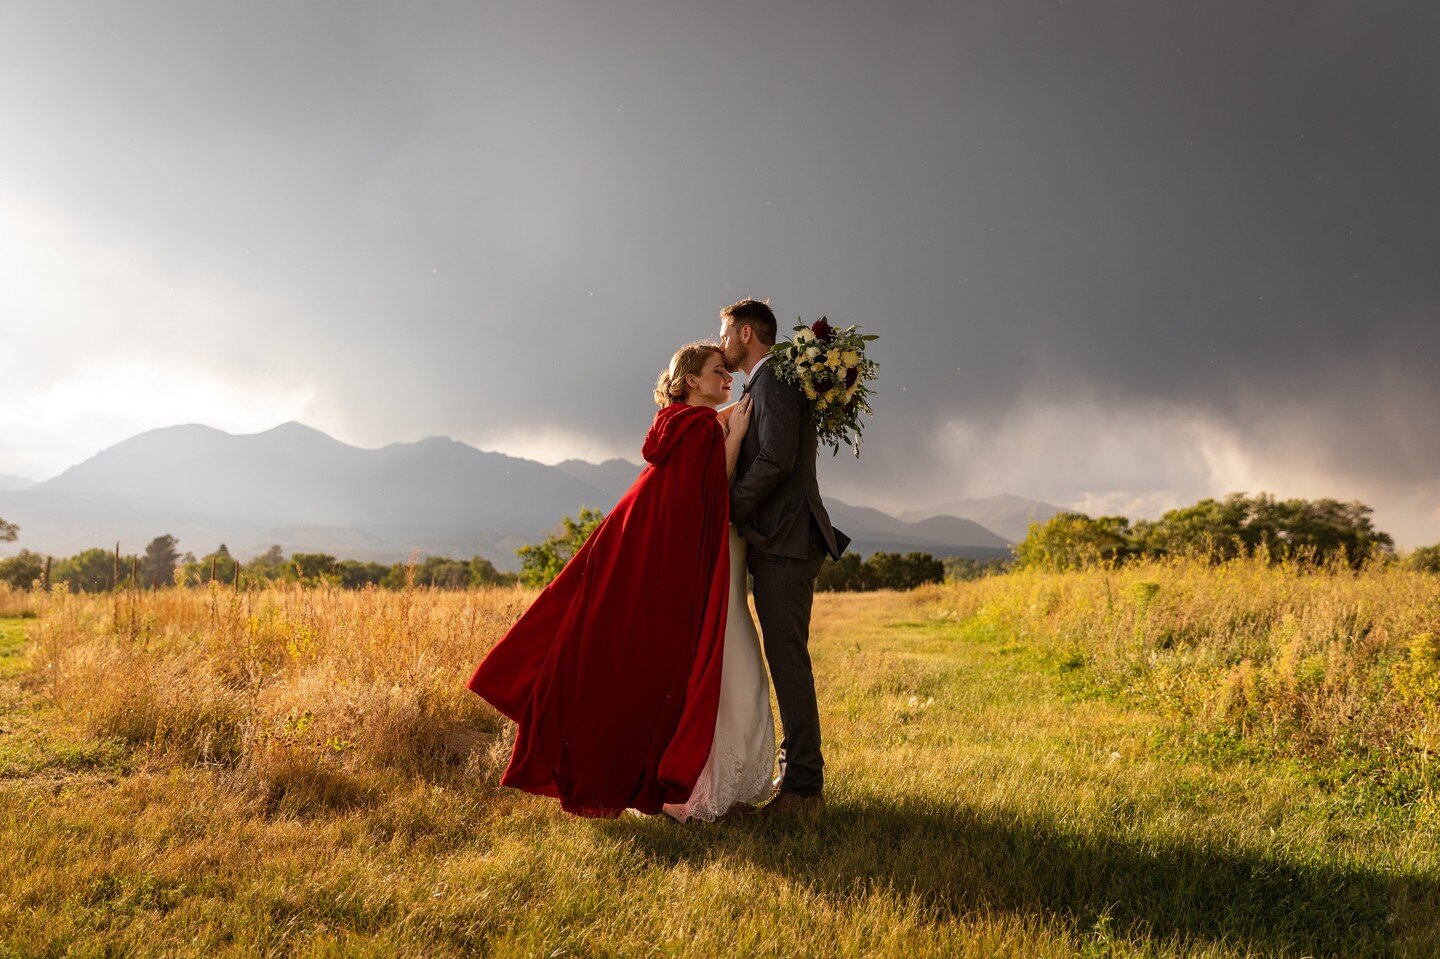 CAN WE JUST HAVE A MOMENT FOR THIS CAPE AND THIS LIGHTING
.
Shot for @jordanquinnphoto !
.
.
.
#coloradowedding #coloradoweddingphotographer #weddingphotographer #weddingphotography #coloradoelopement #coloradoelopementphotographer #elopementphotogra